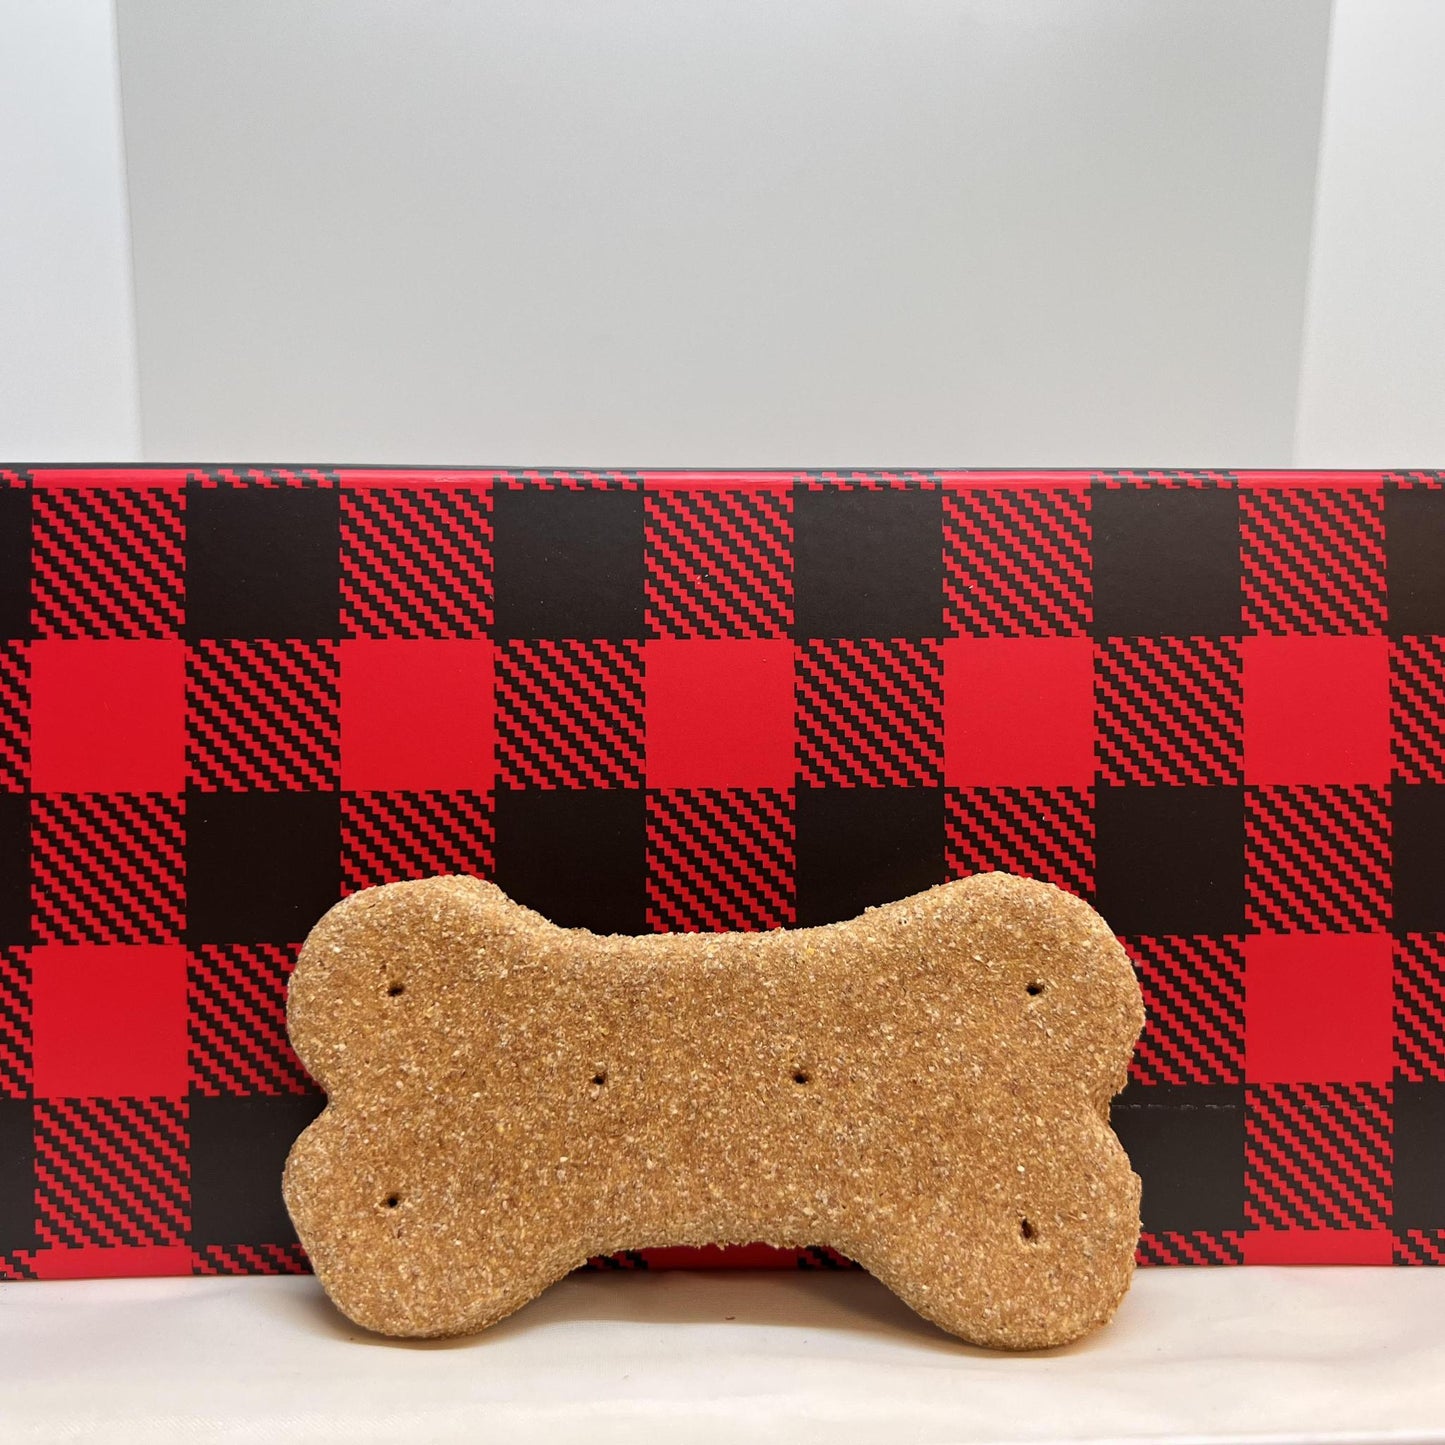 Kelly's K-9 Dog Biscuits